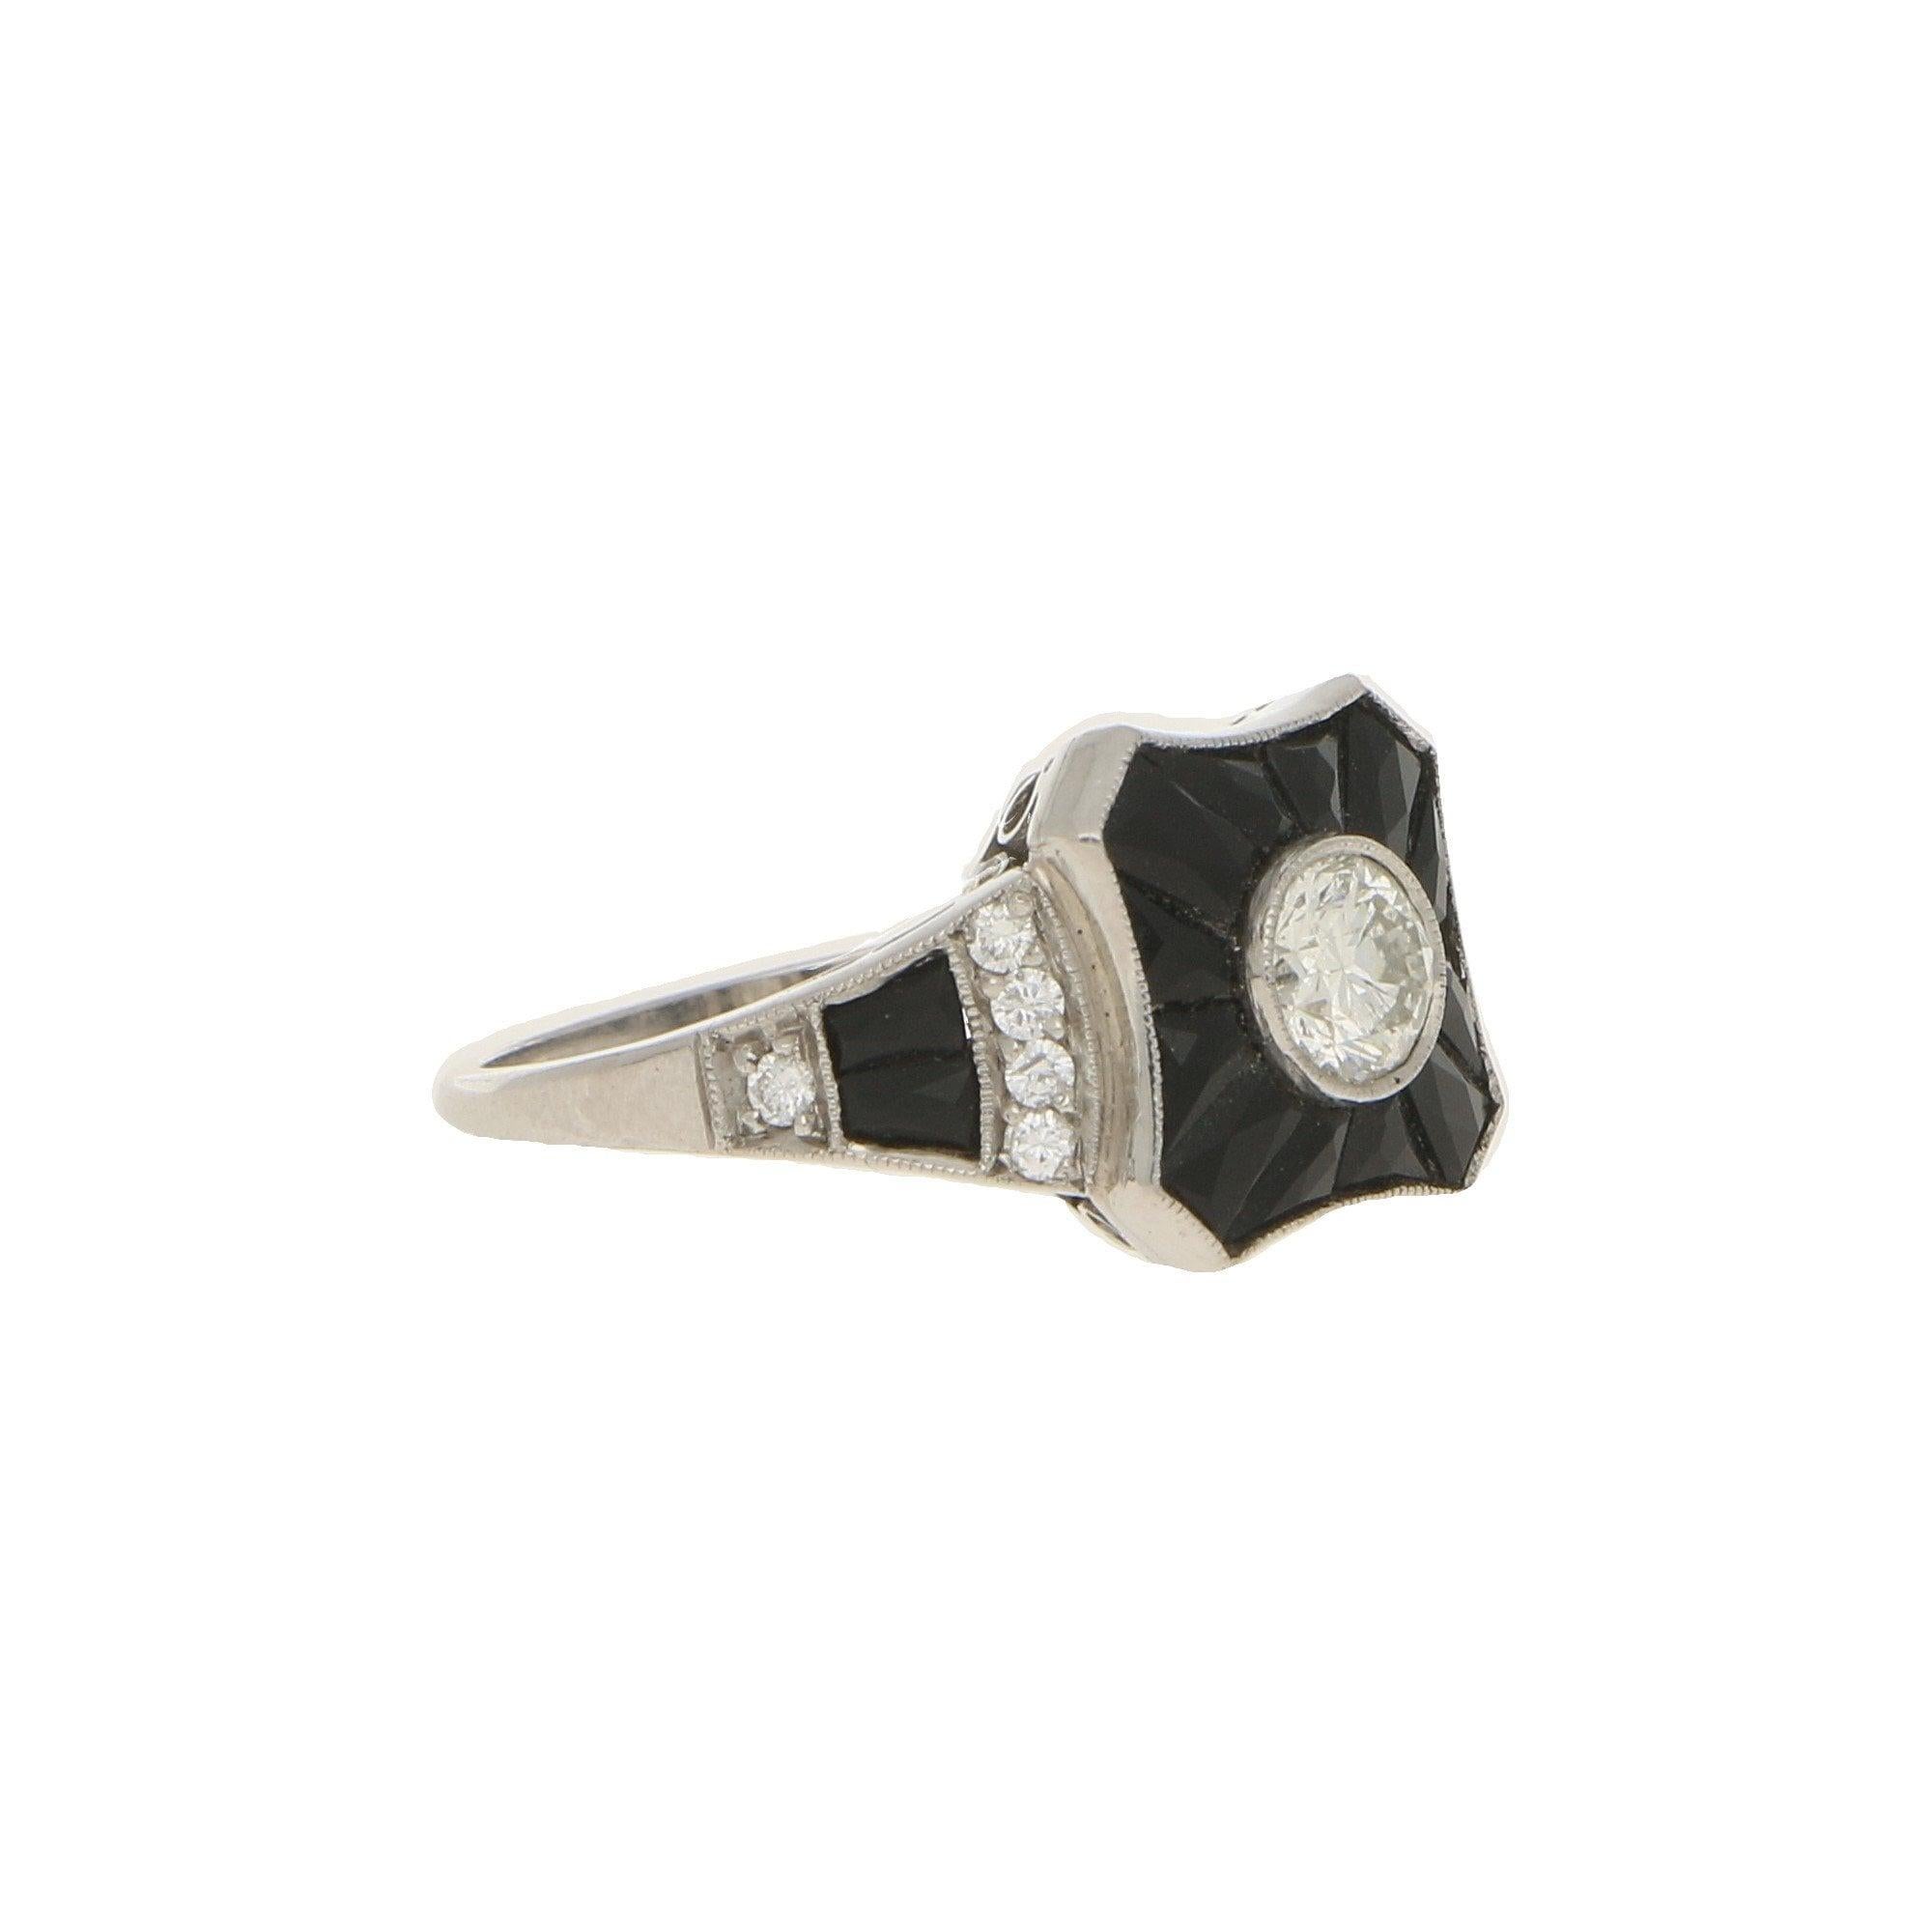 Women's or Men's Art Deco Style Diamond and Onyx Target Engagement Ring Set in Platinum